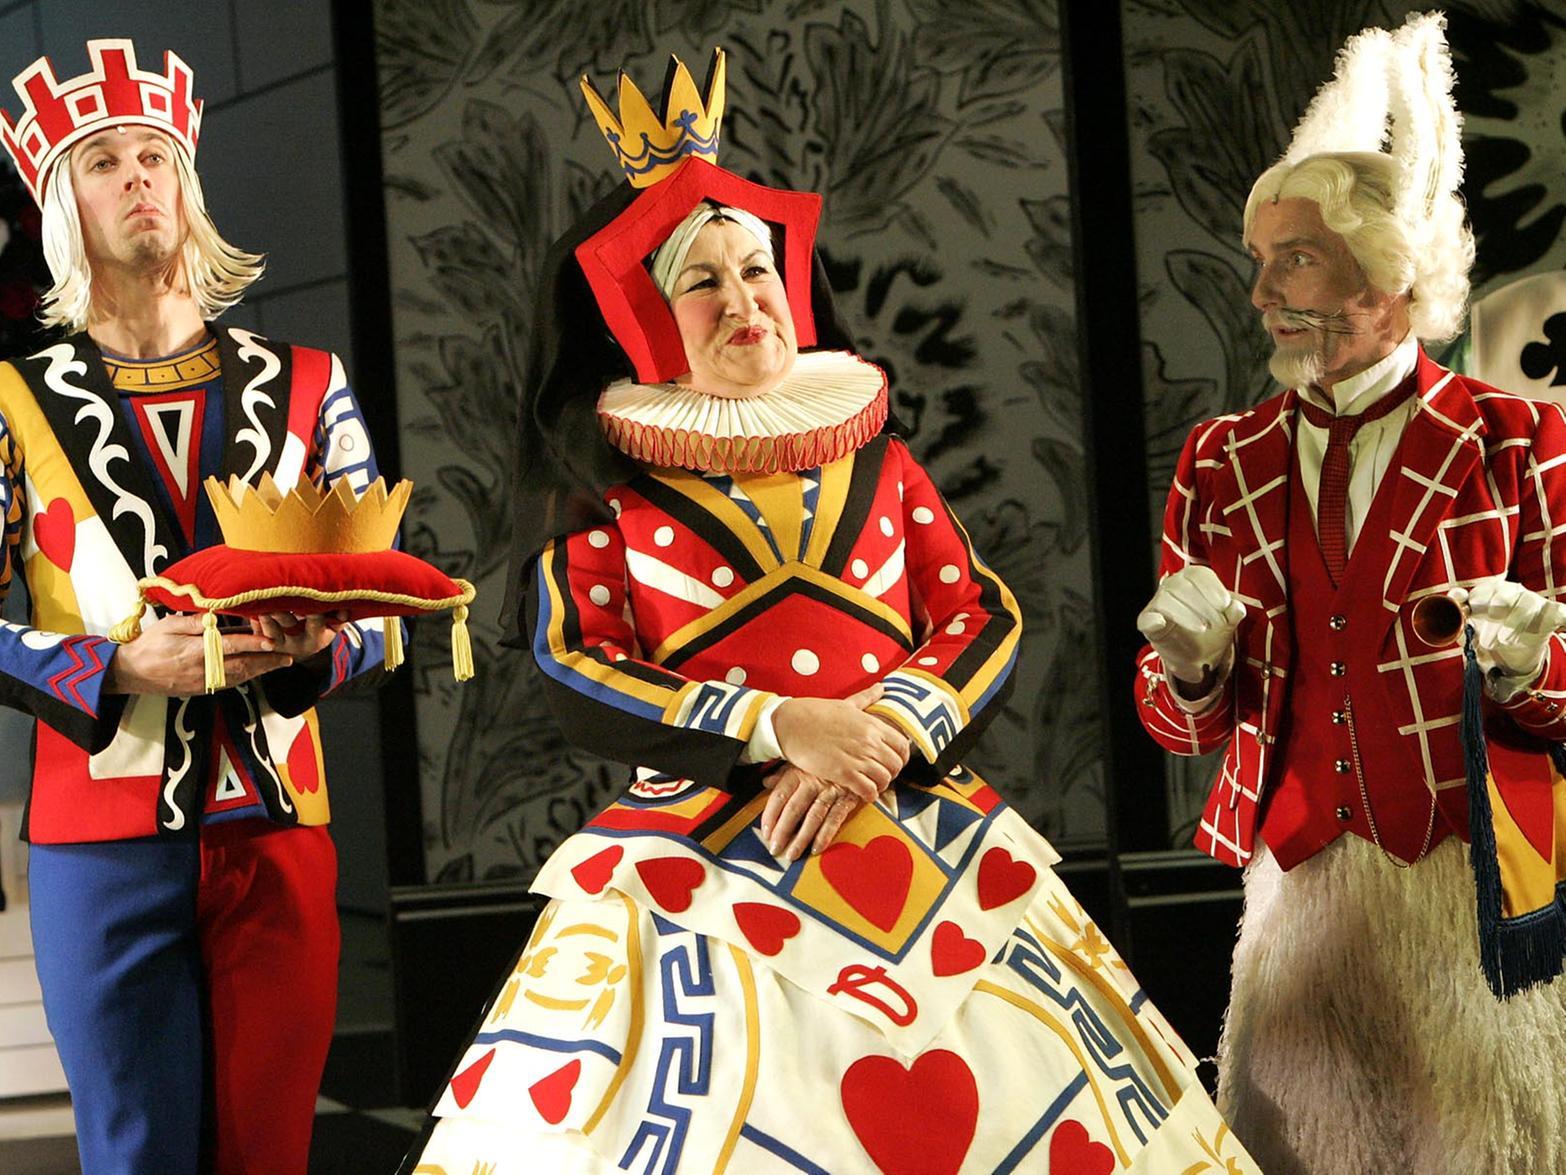 It was 'off with their heads' as the Playhouse staged Alice in Wonderland.